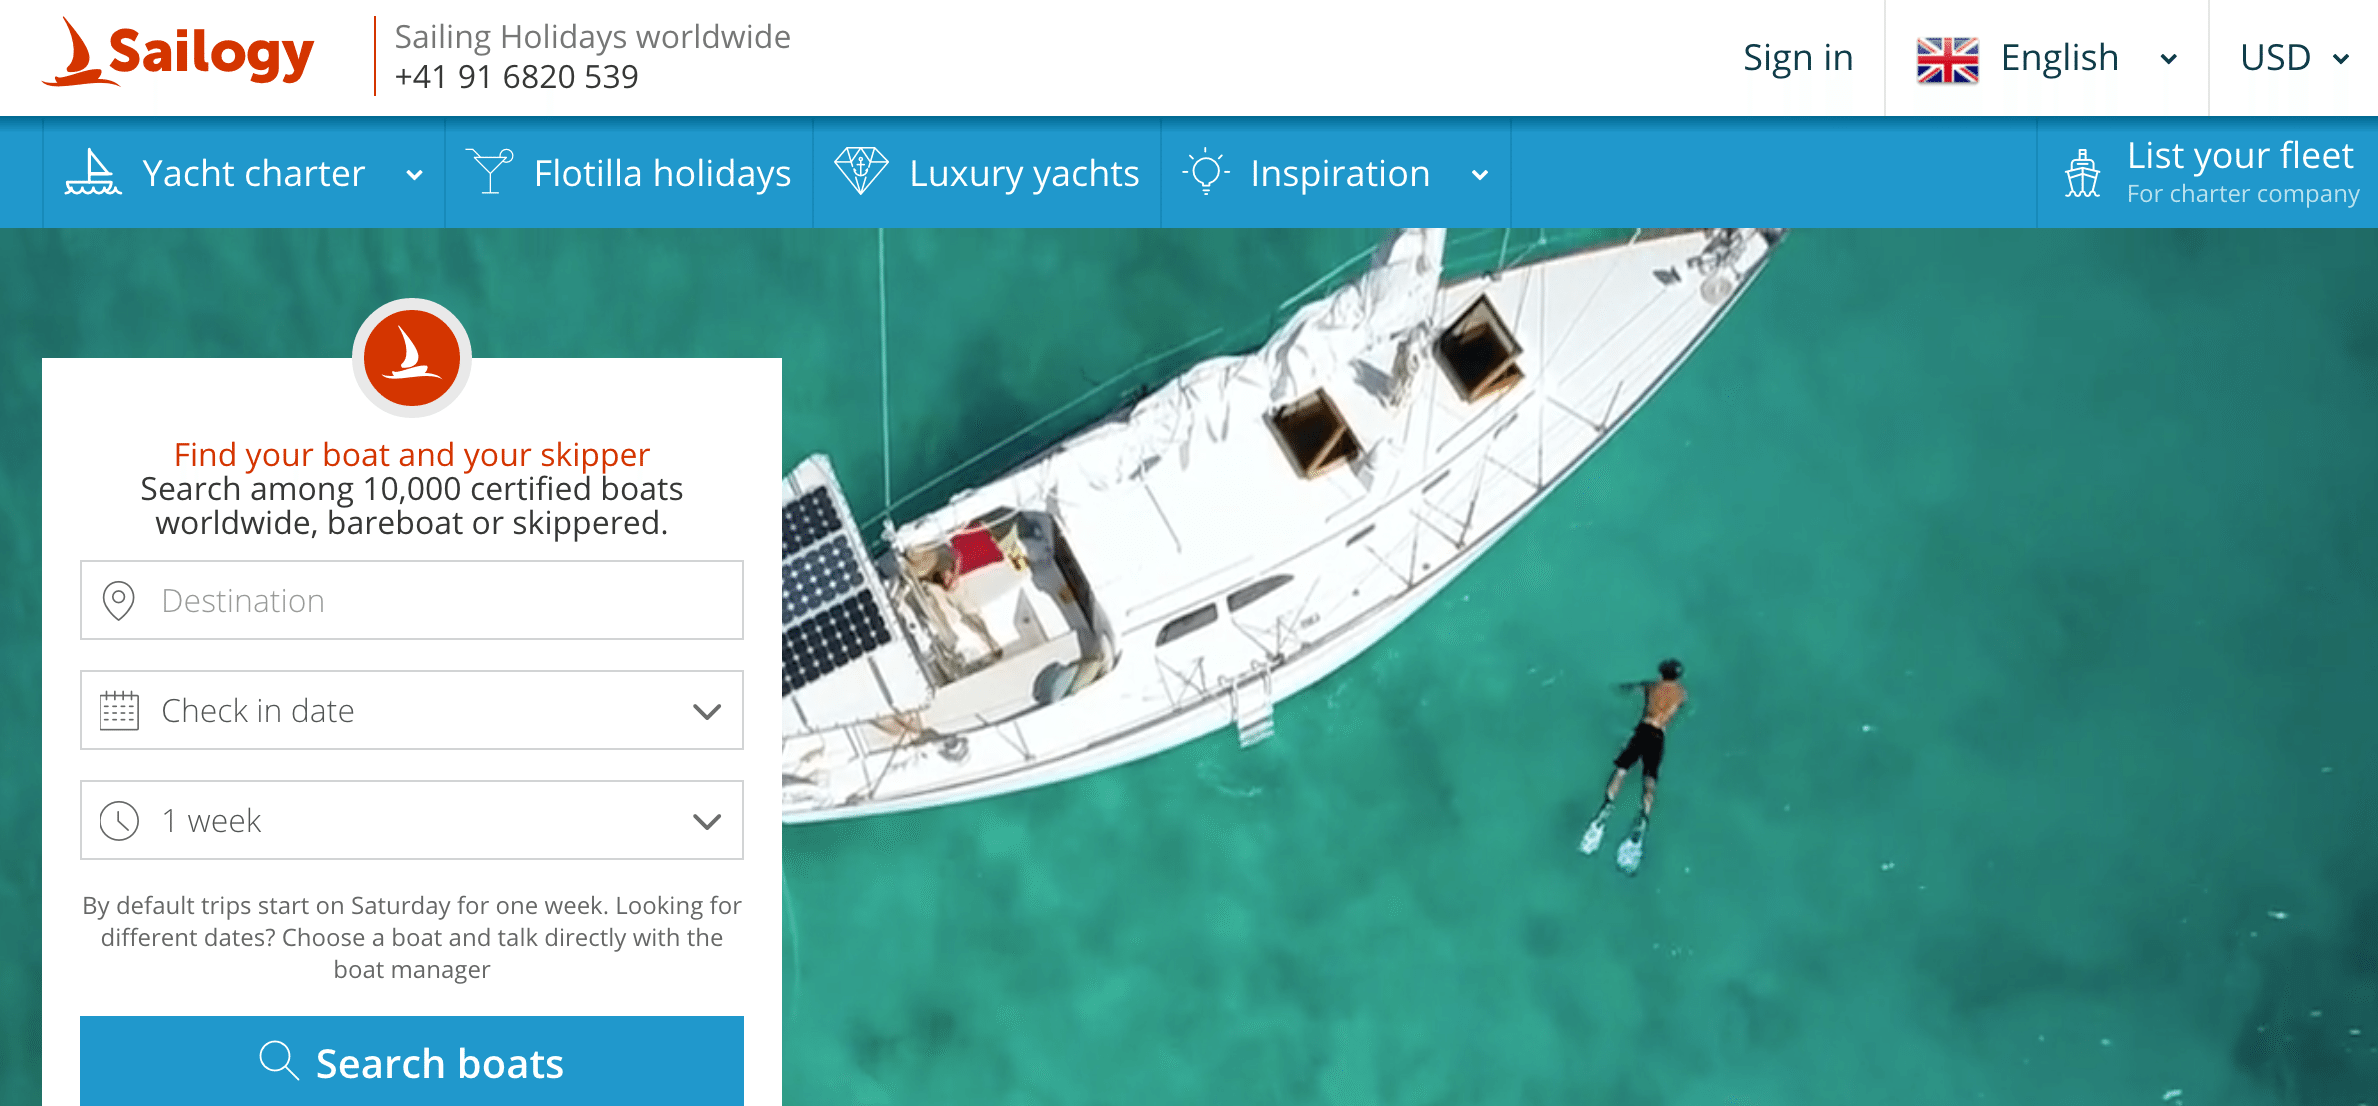 Sailogy connects consumers to yacht charter companies and private boat owners.